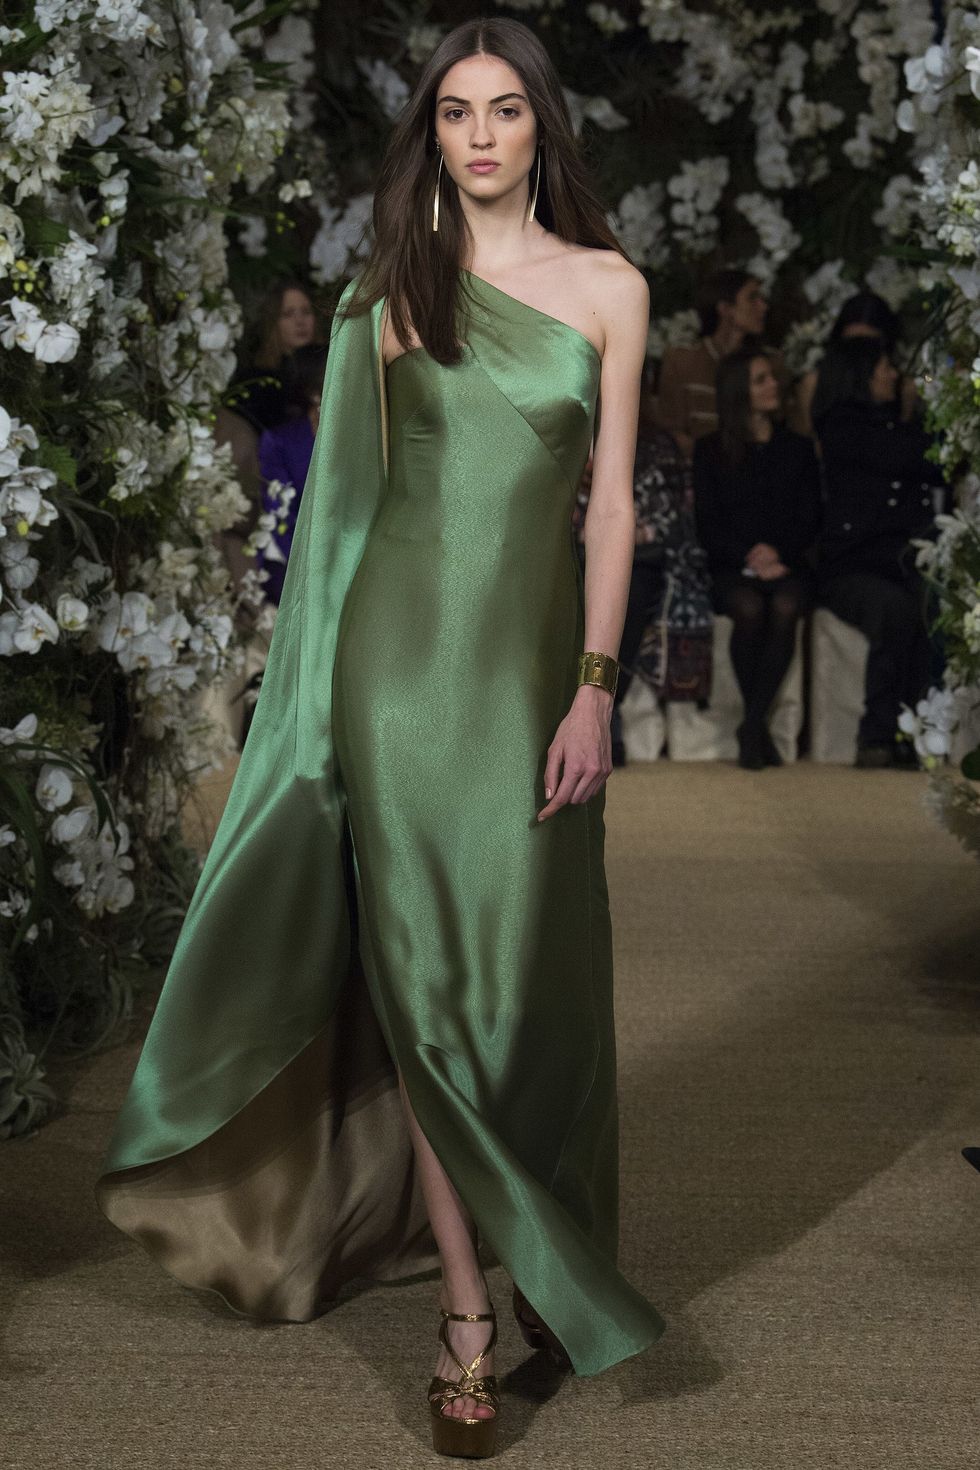 Fashion model, Clothing, Dress, Fashion, Green, Haute couture, Shoulder, Formal wear, Gown, Bridal party dress, 